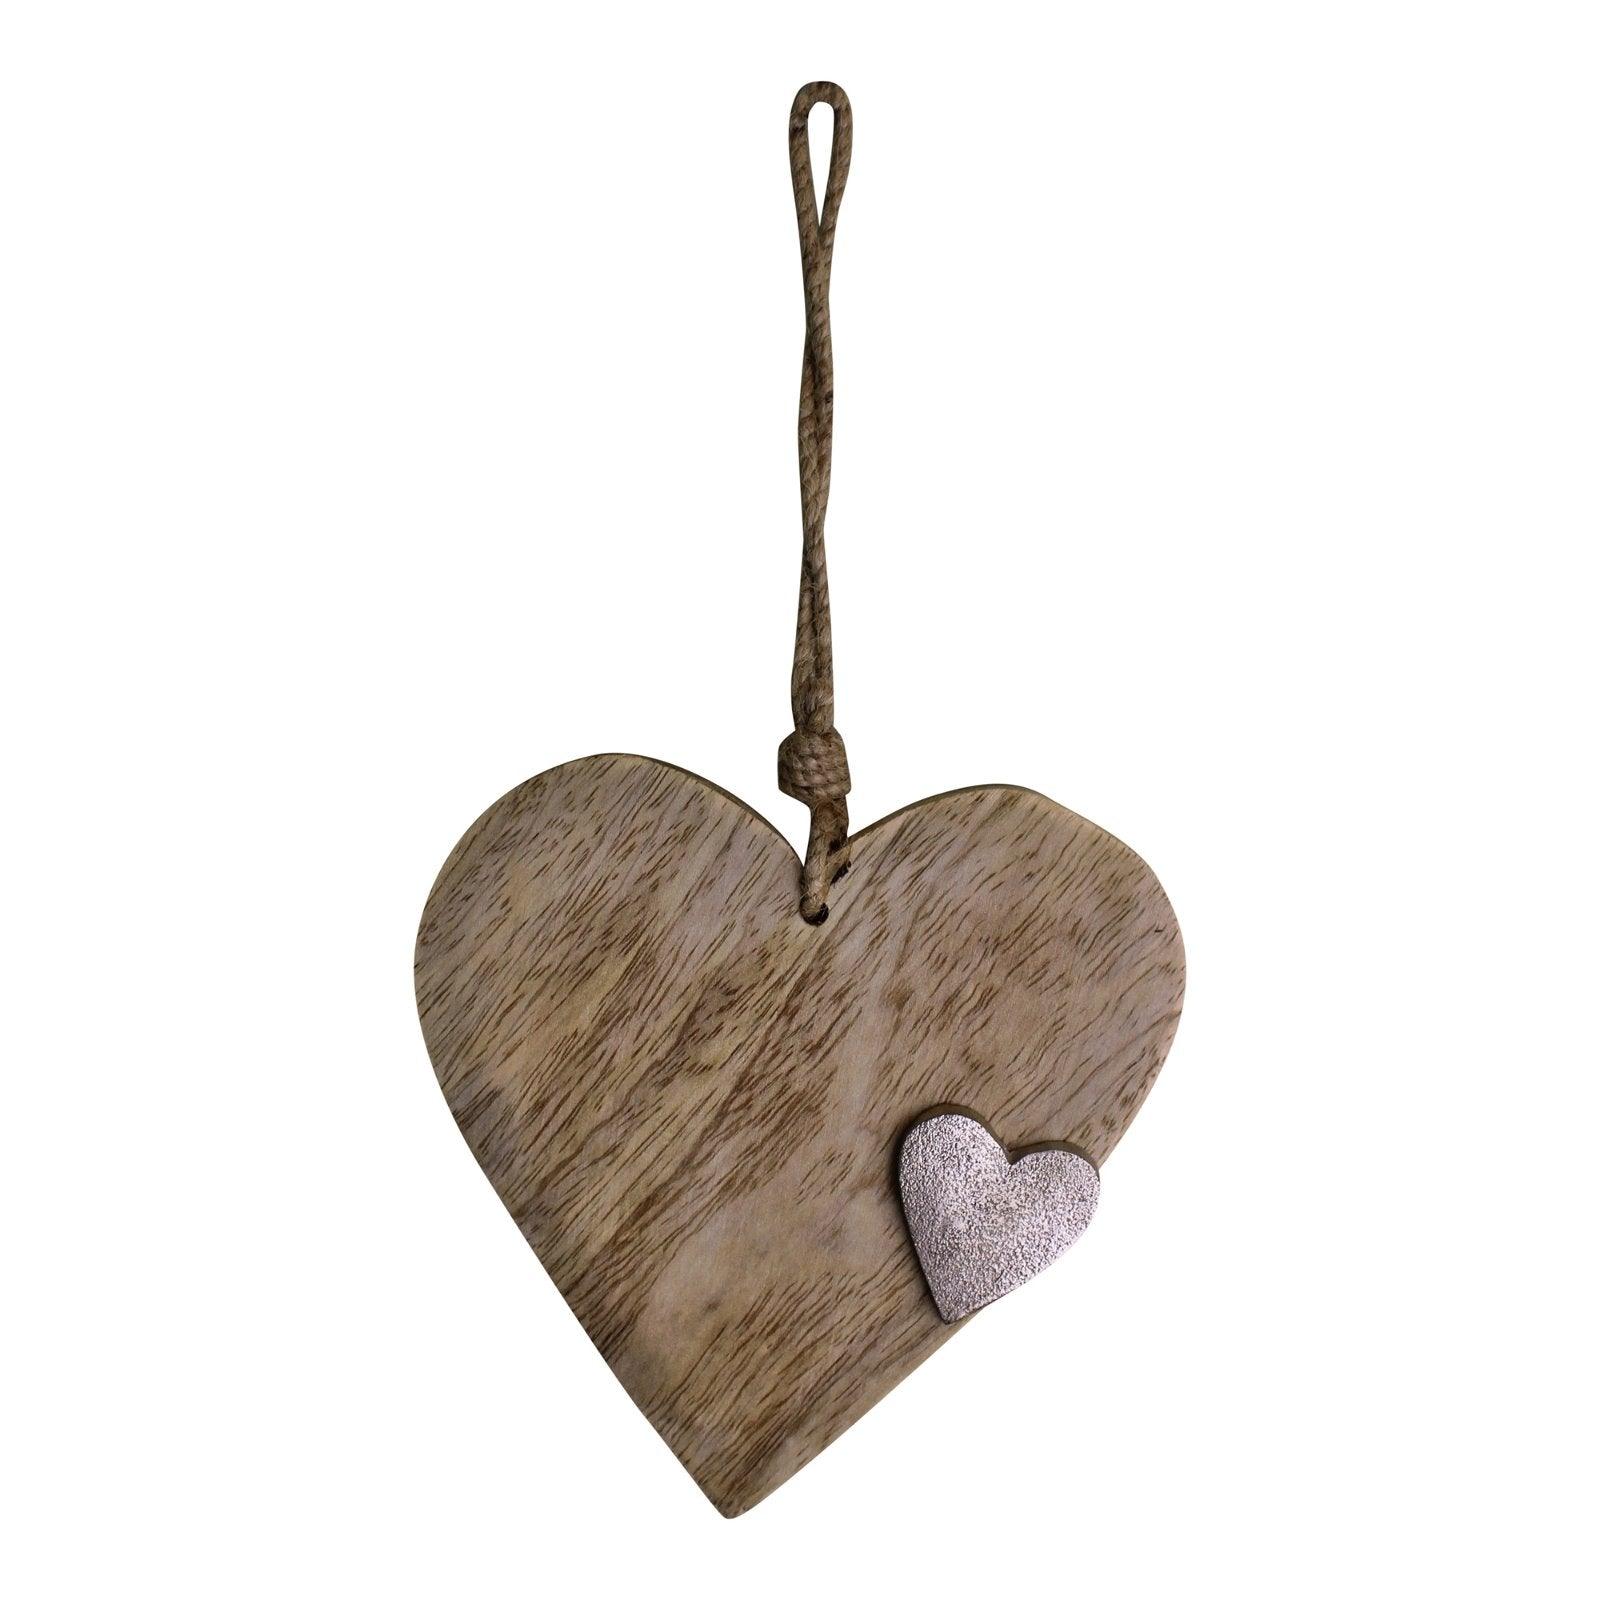 Wooden Hanging Heart Ornament with Silver Heart-Ornaments